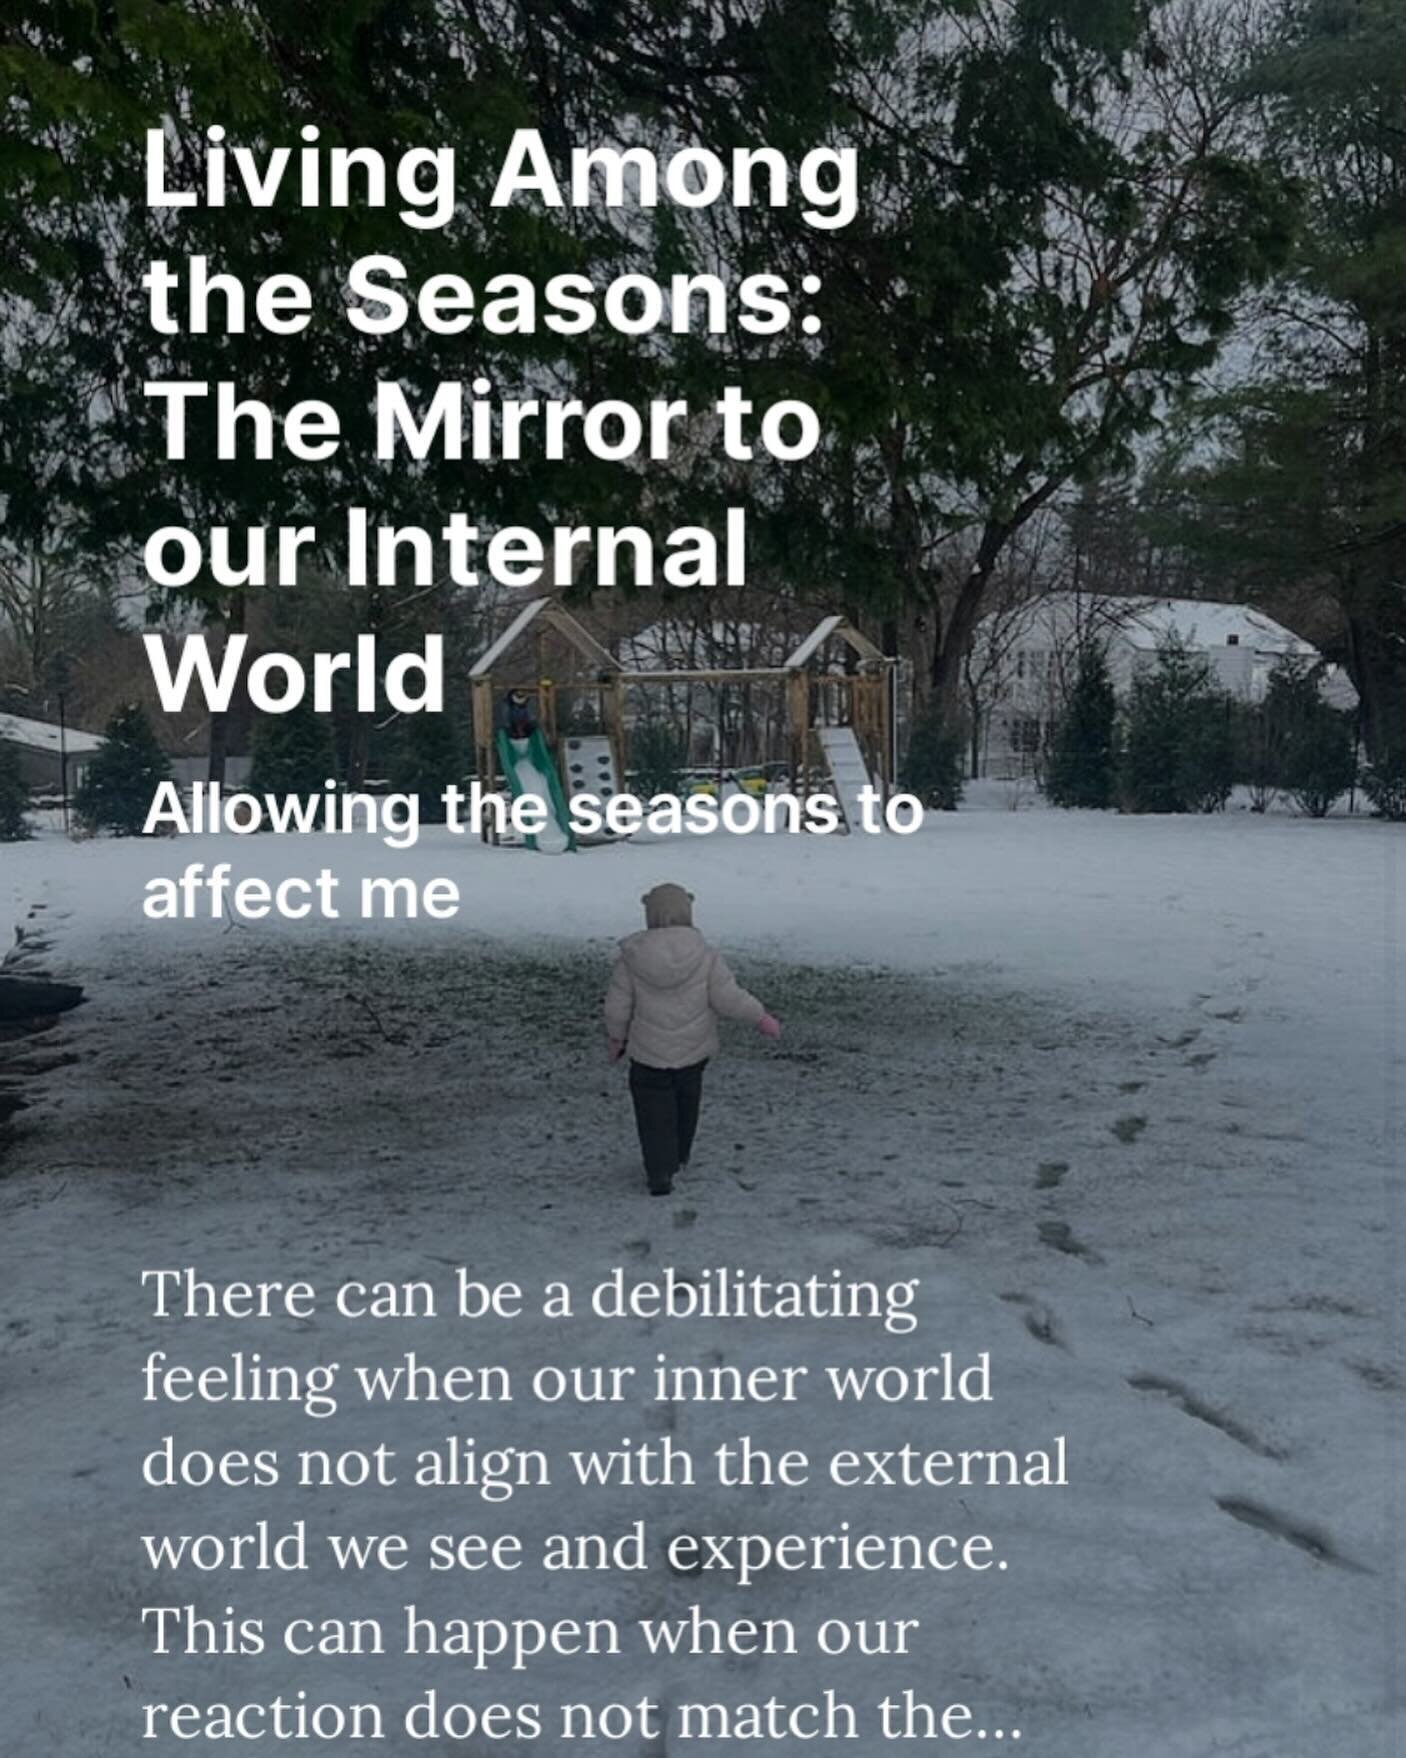 New @substack with inspiration and insights from @nedratawwab @jsuskin @eliseloehnen @satyabyock @adriannelenker ✨ turning towards living seasonally, finding where you are in this moment and knowing that your own seasons come and go. Welcome in sprin